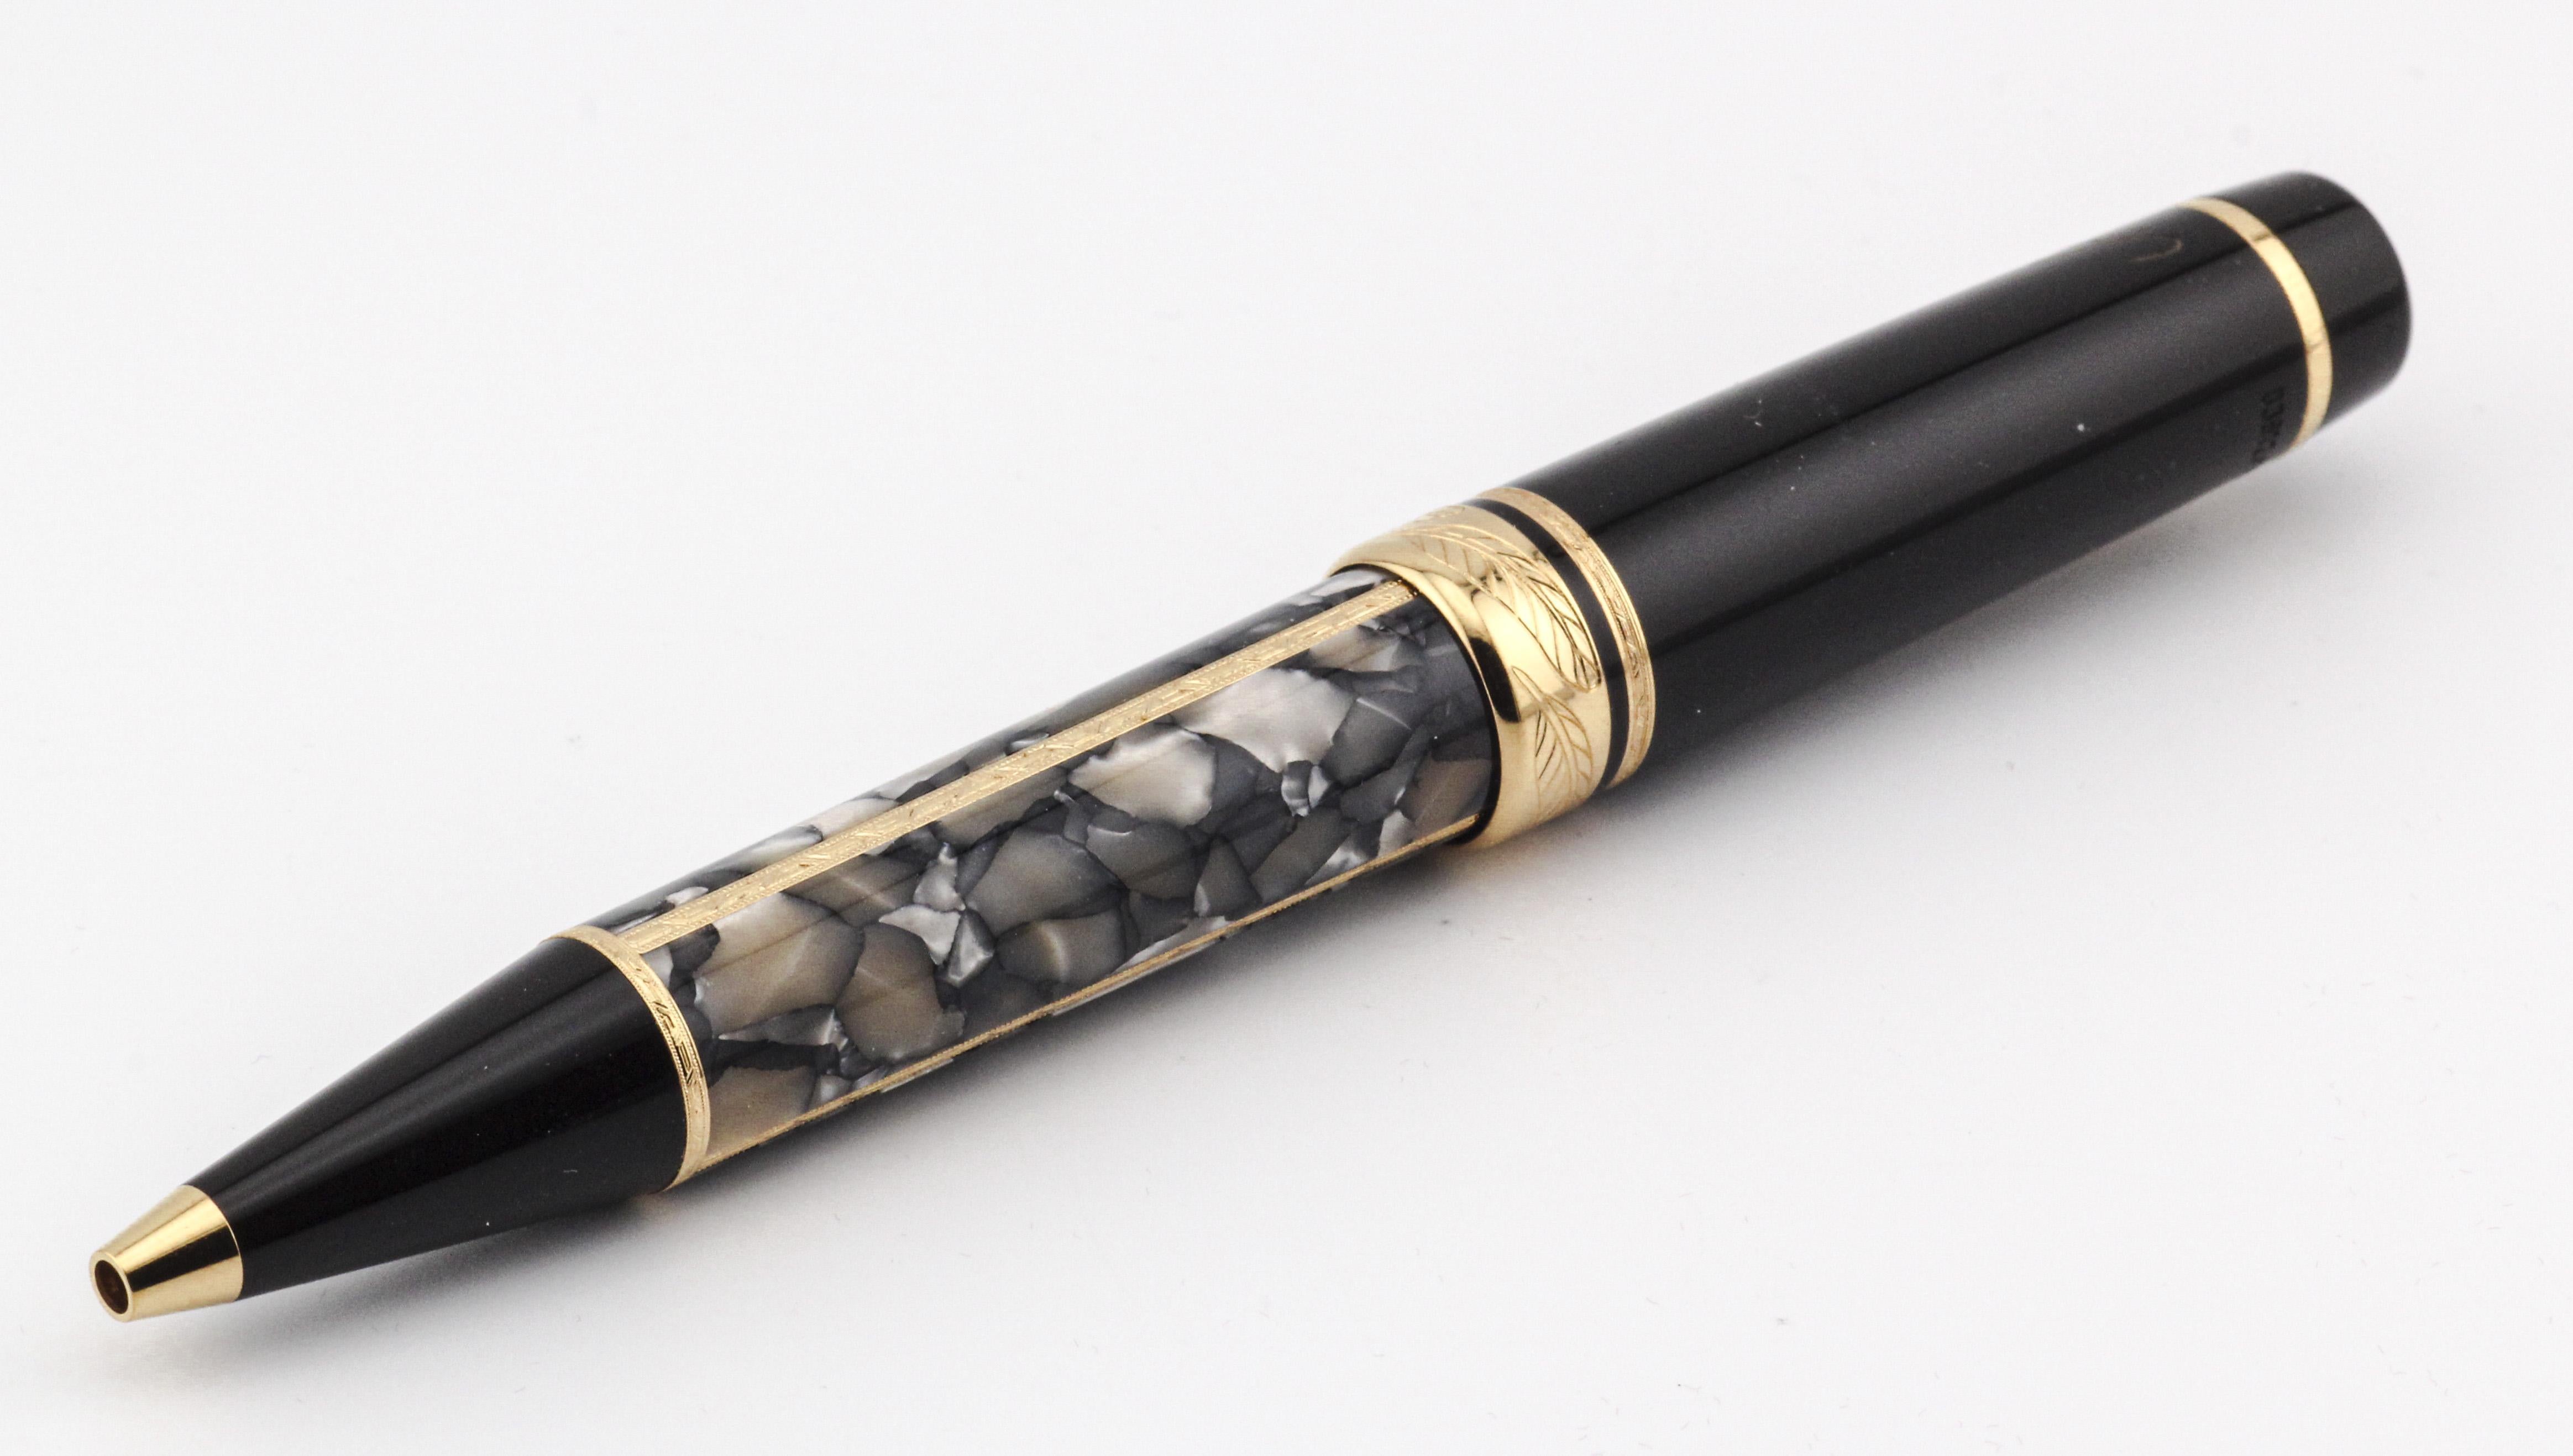 Limited Edition Montblanc Alexander Dumas Writer Series Ballpoint Pen In Good Condition For Sale In Bellmore, NY